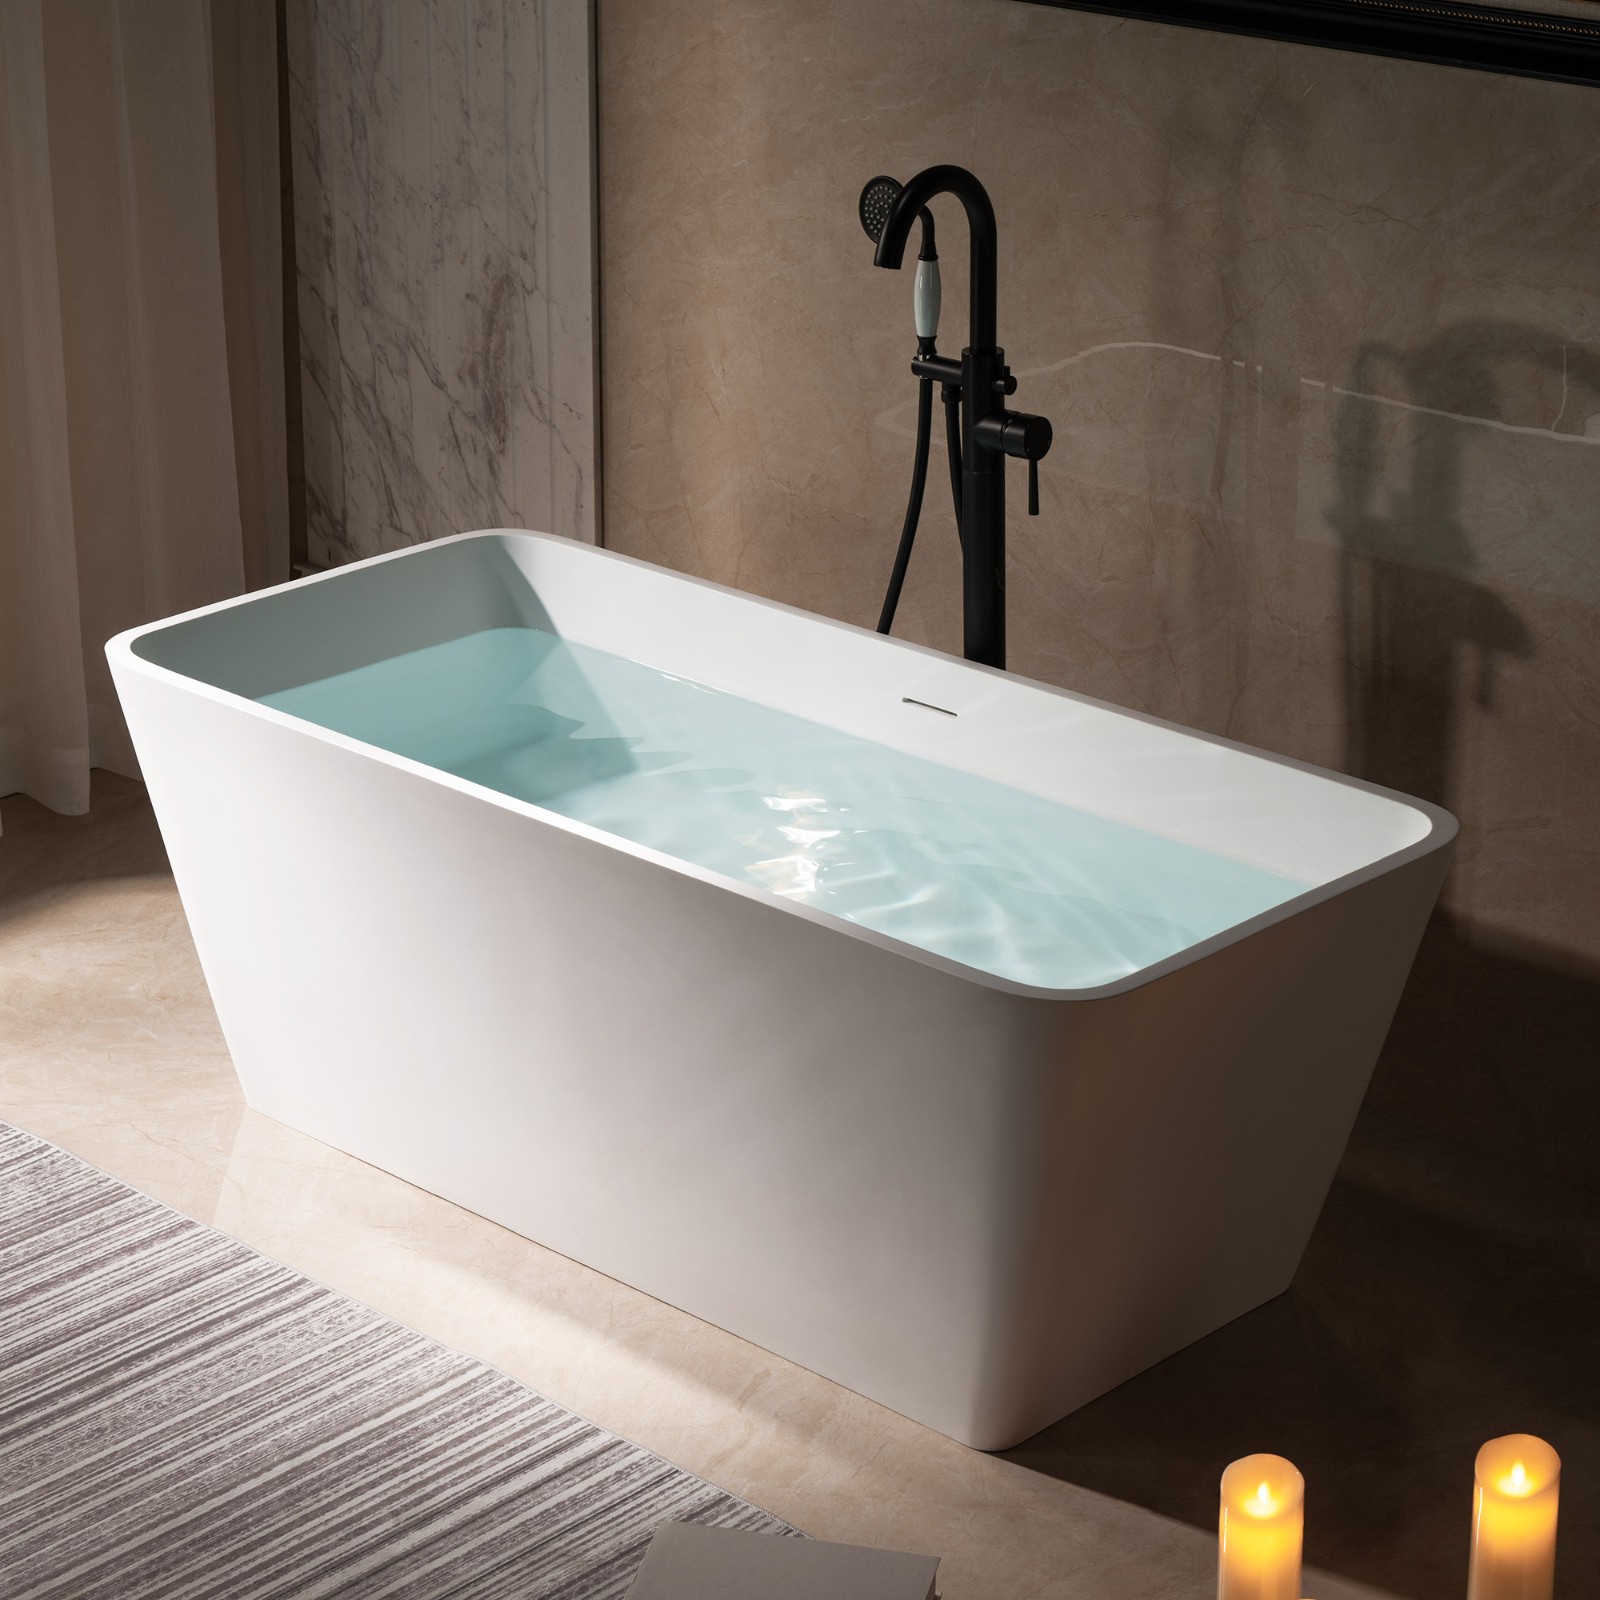  WOODBRIDGE 59 in. x 27.5 in. Luxury Contemporary Solid Surface Freestanding Bathtub in Matte White_17